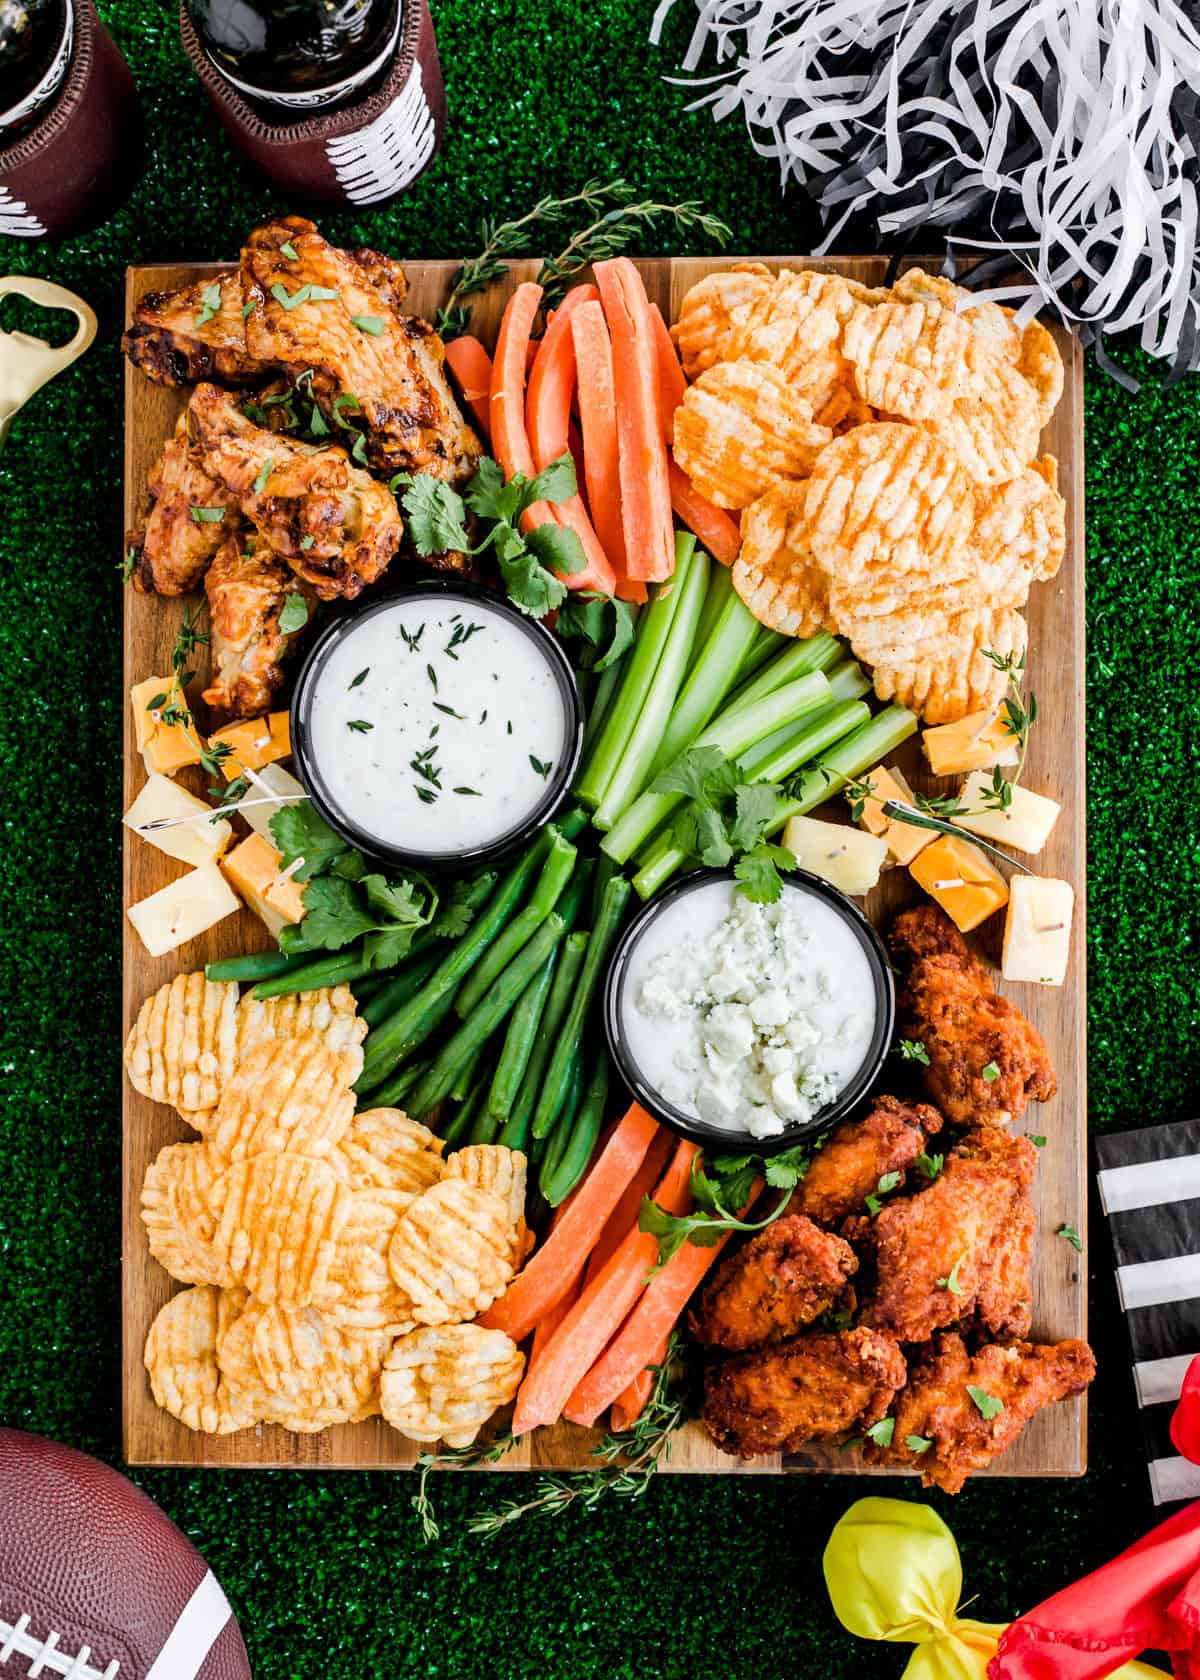 chicken wings, vegetable sticks, white dips, and cheese cubes on wood board, with turf grass background.